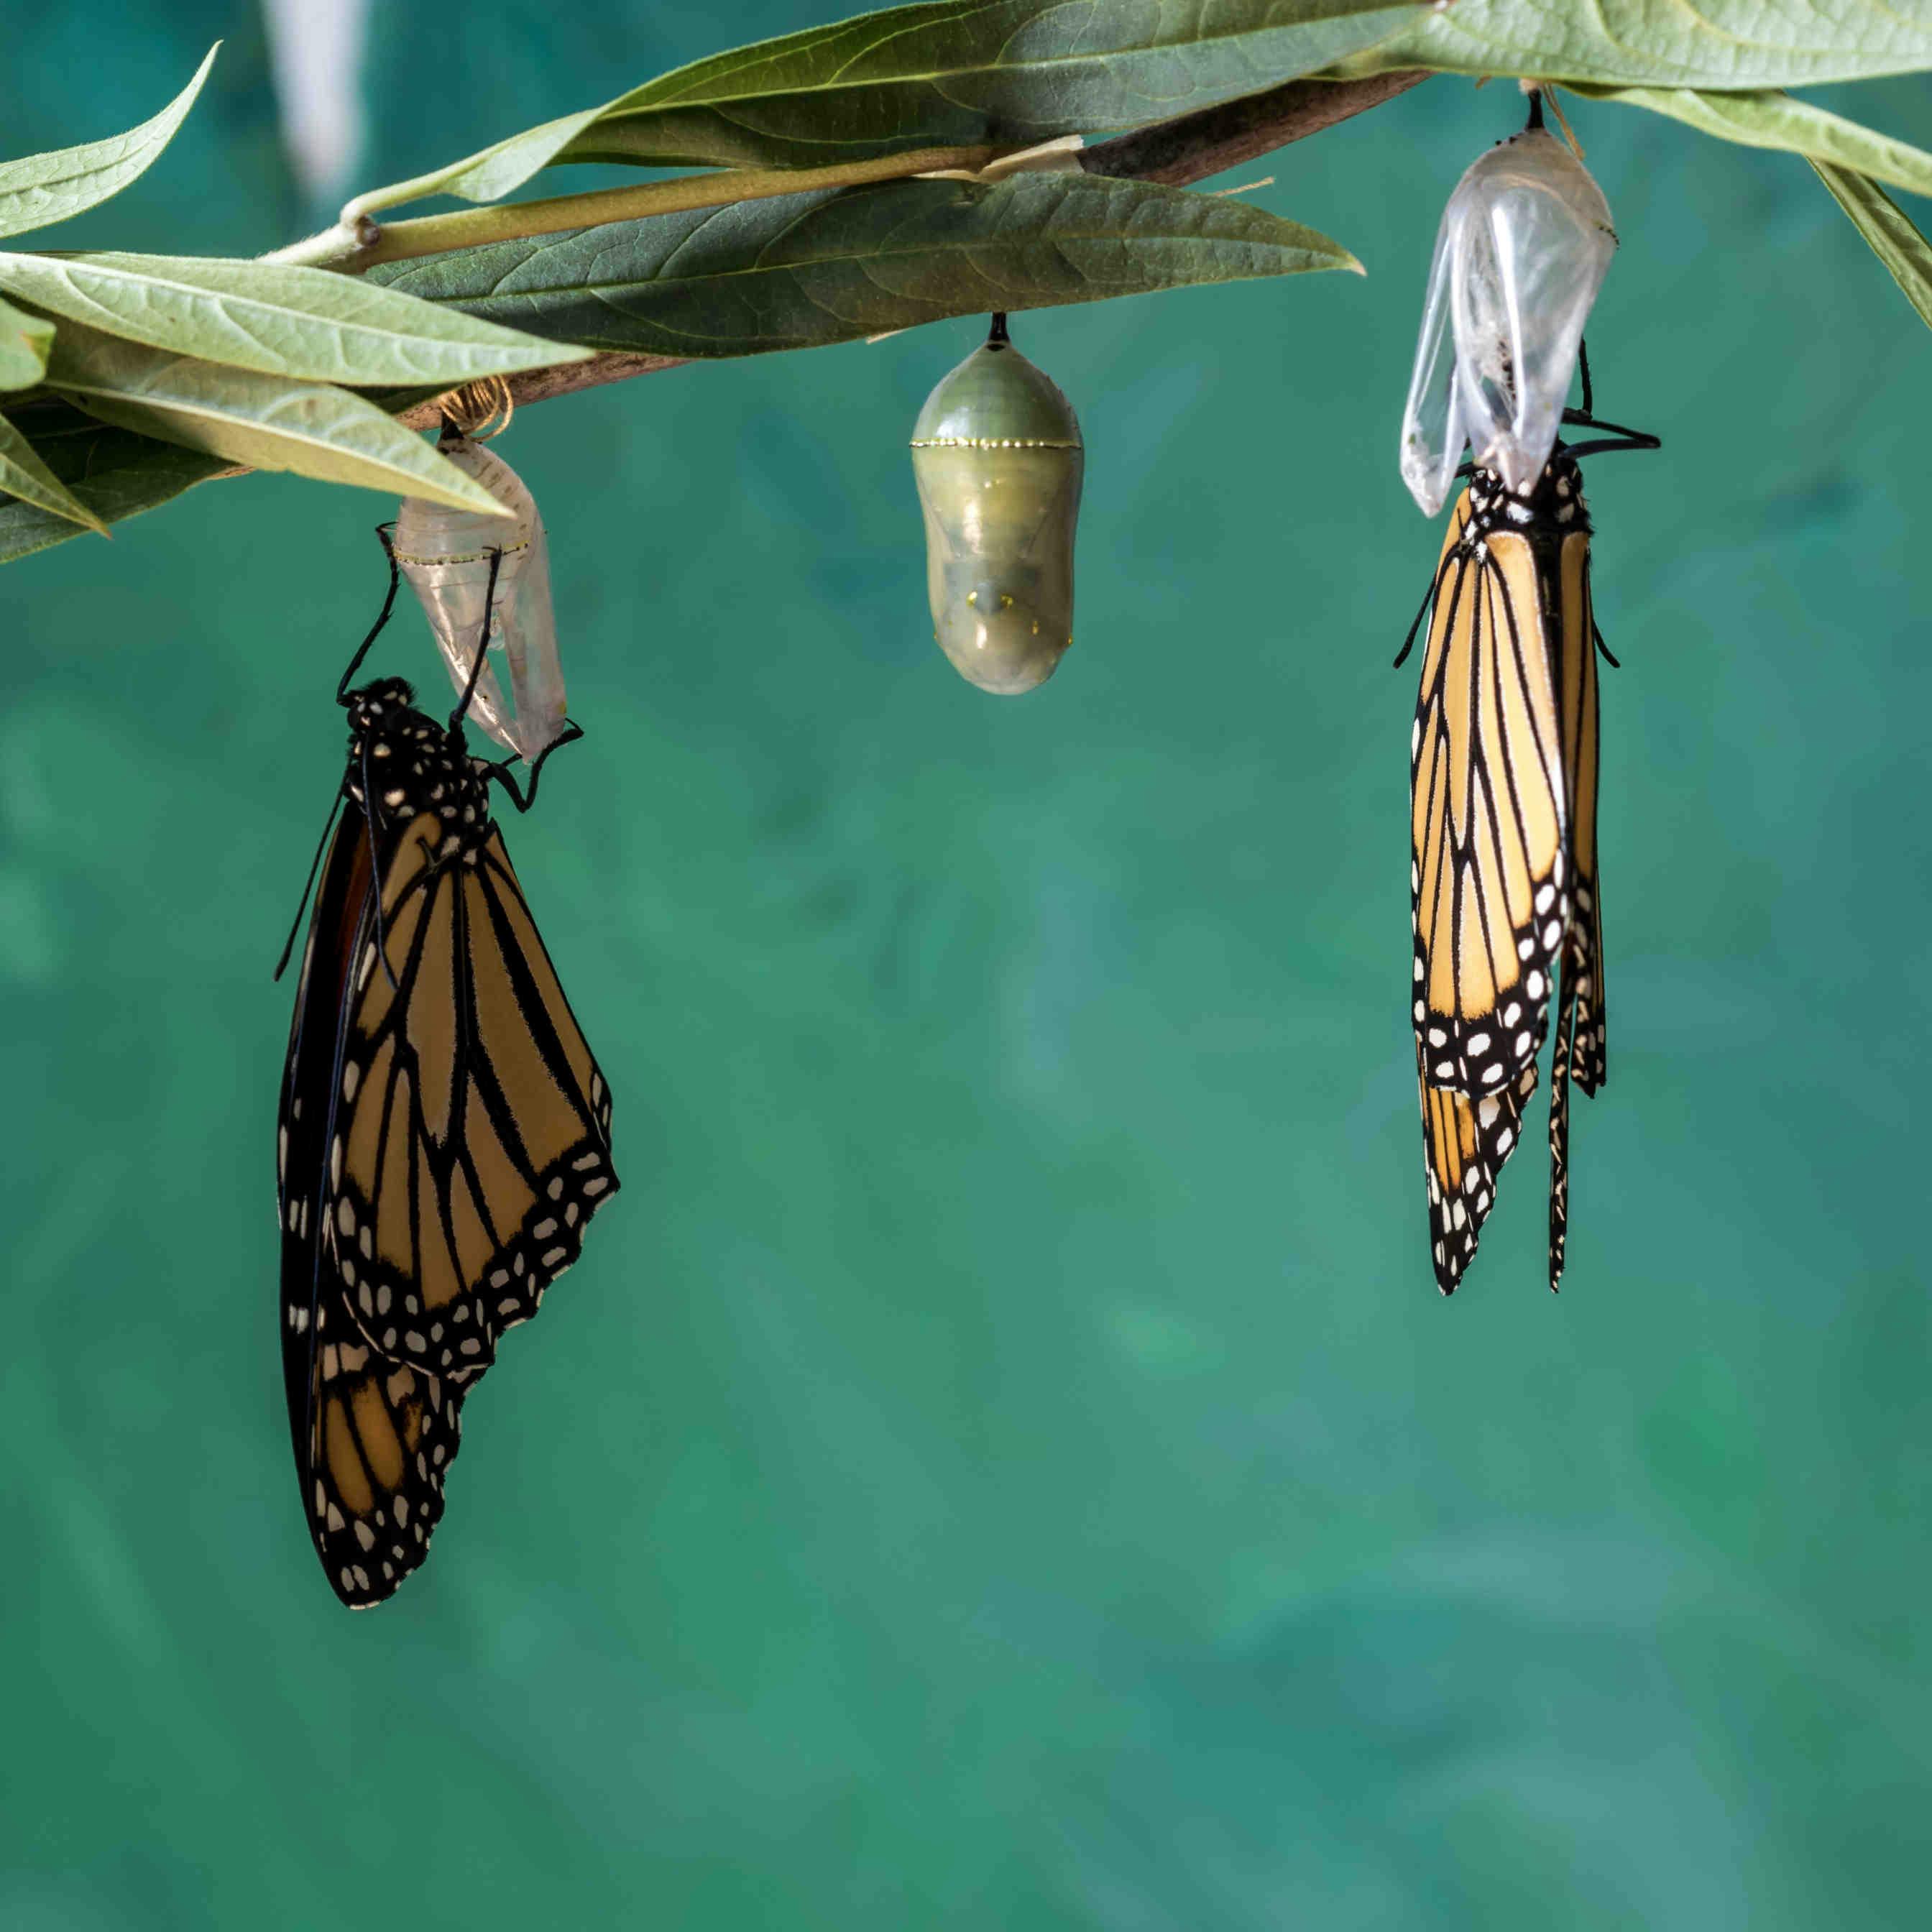 The butterfly life cycle: stages